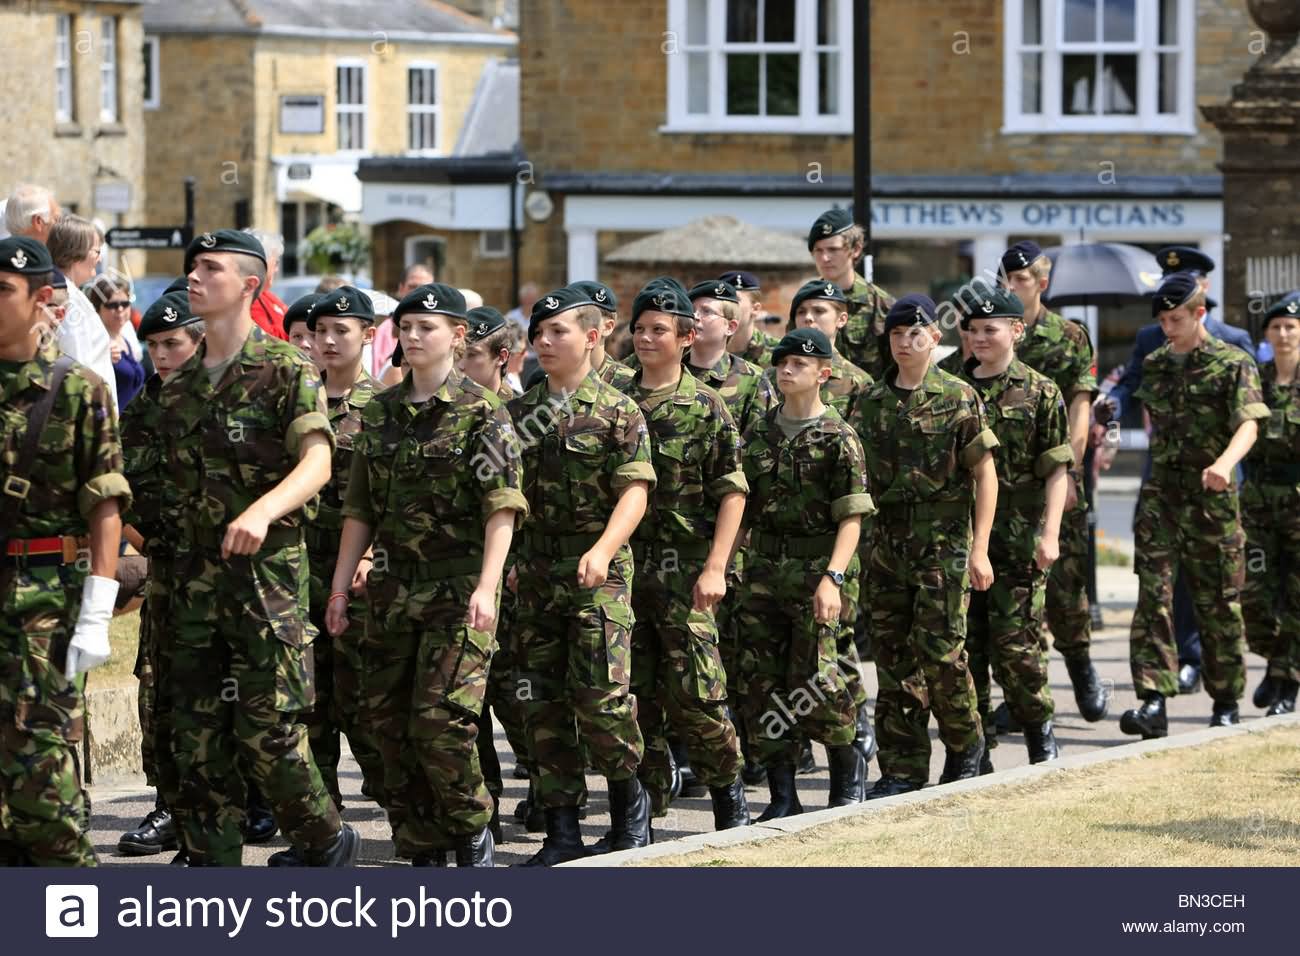 British Army Cadet Soldiers Taking Part In Armed Forces Day Parade